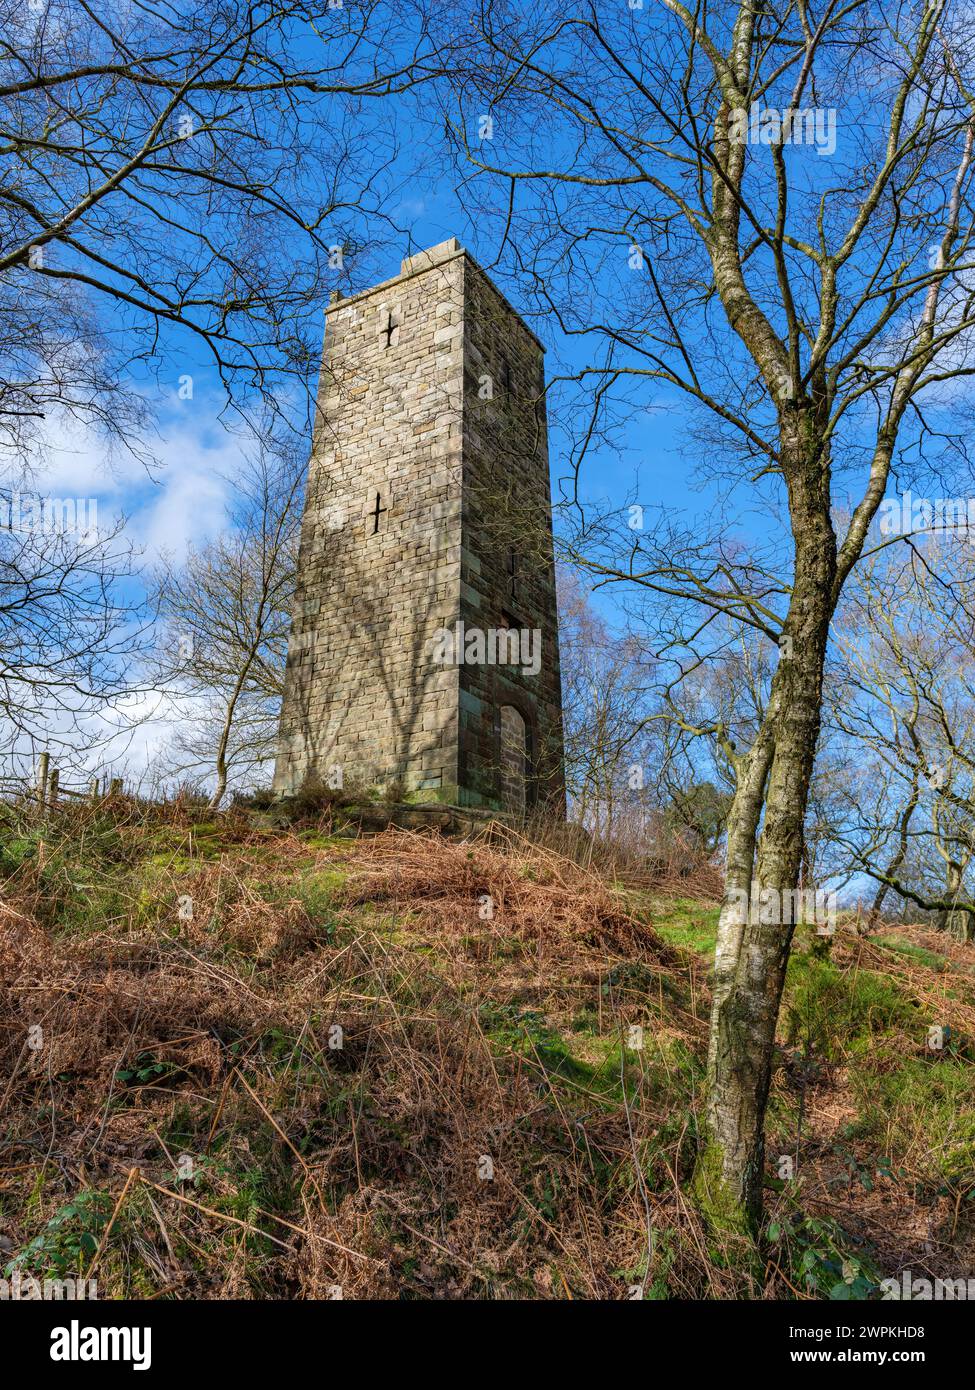 The Reform Tower or Earl Grey Tower on the edge of Stanton Moor in the Derbyshire Peak District UK built to celebrate the Reform Act of 1832 Stock Photo